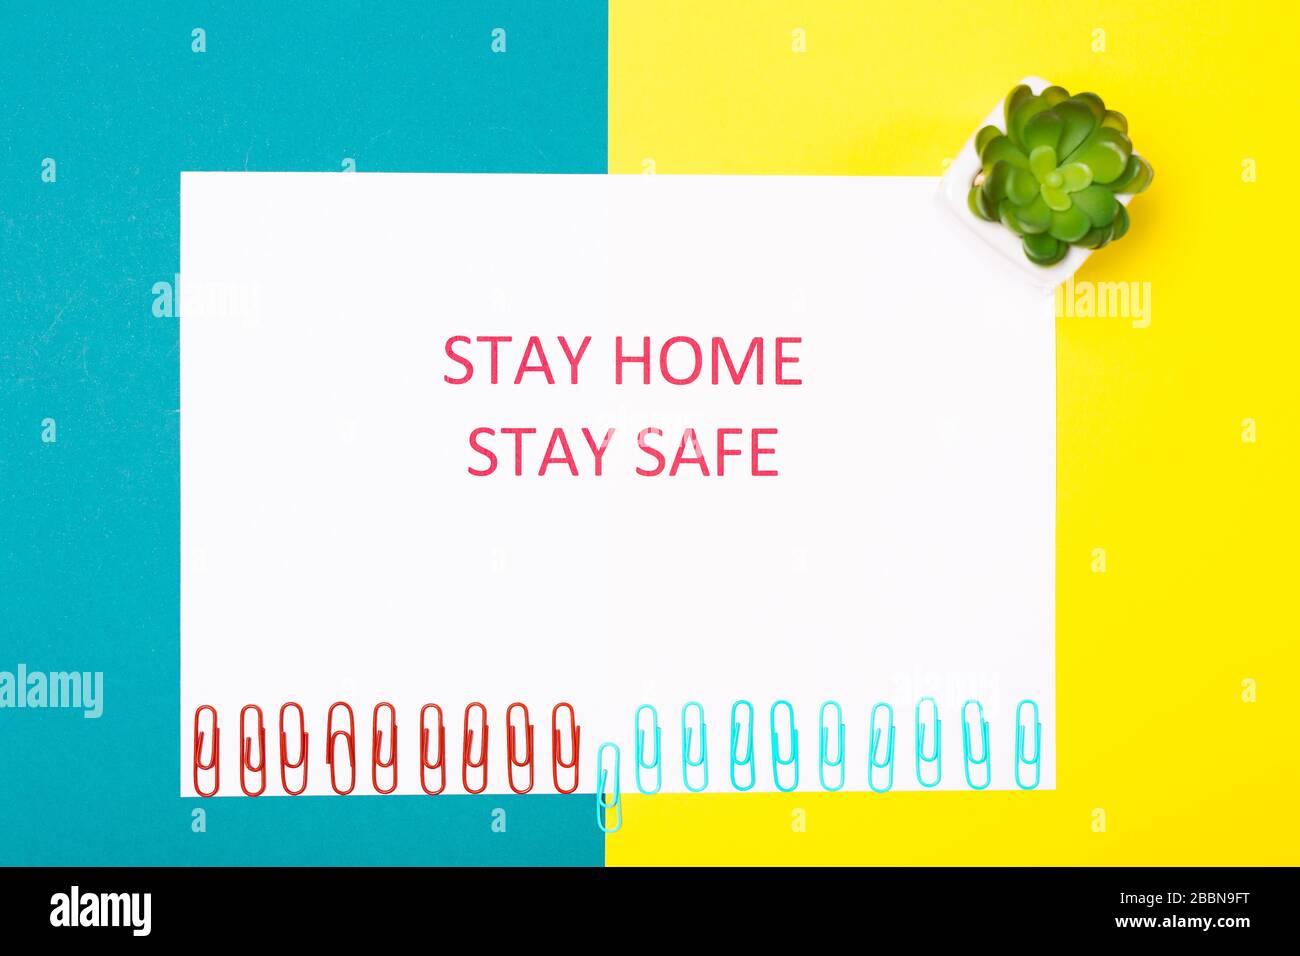 Coronavirus Pandemic Protection Concept. Words stay at home. Minimal concept. Stay safe, how to stop coronavirus from spreading. Social Distancing Stock Photo